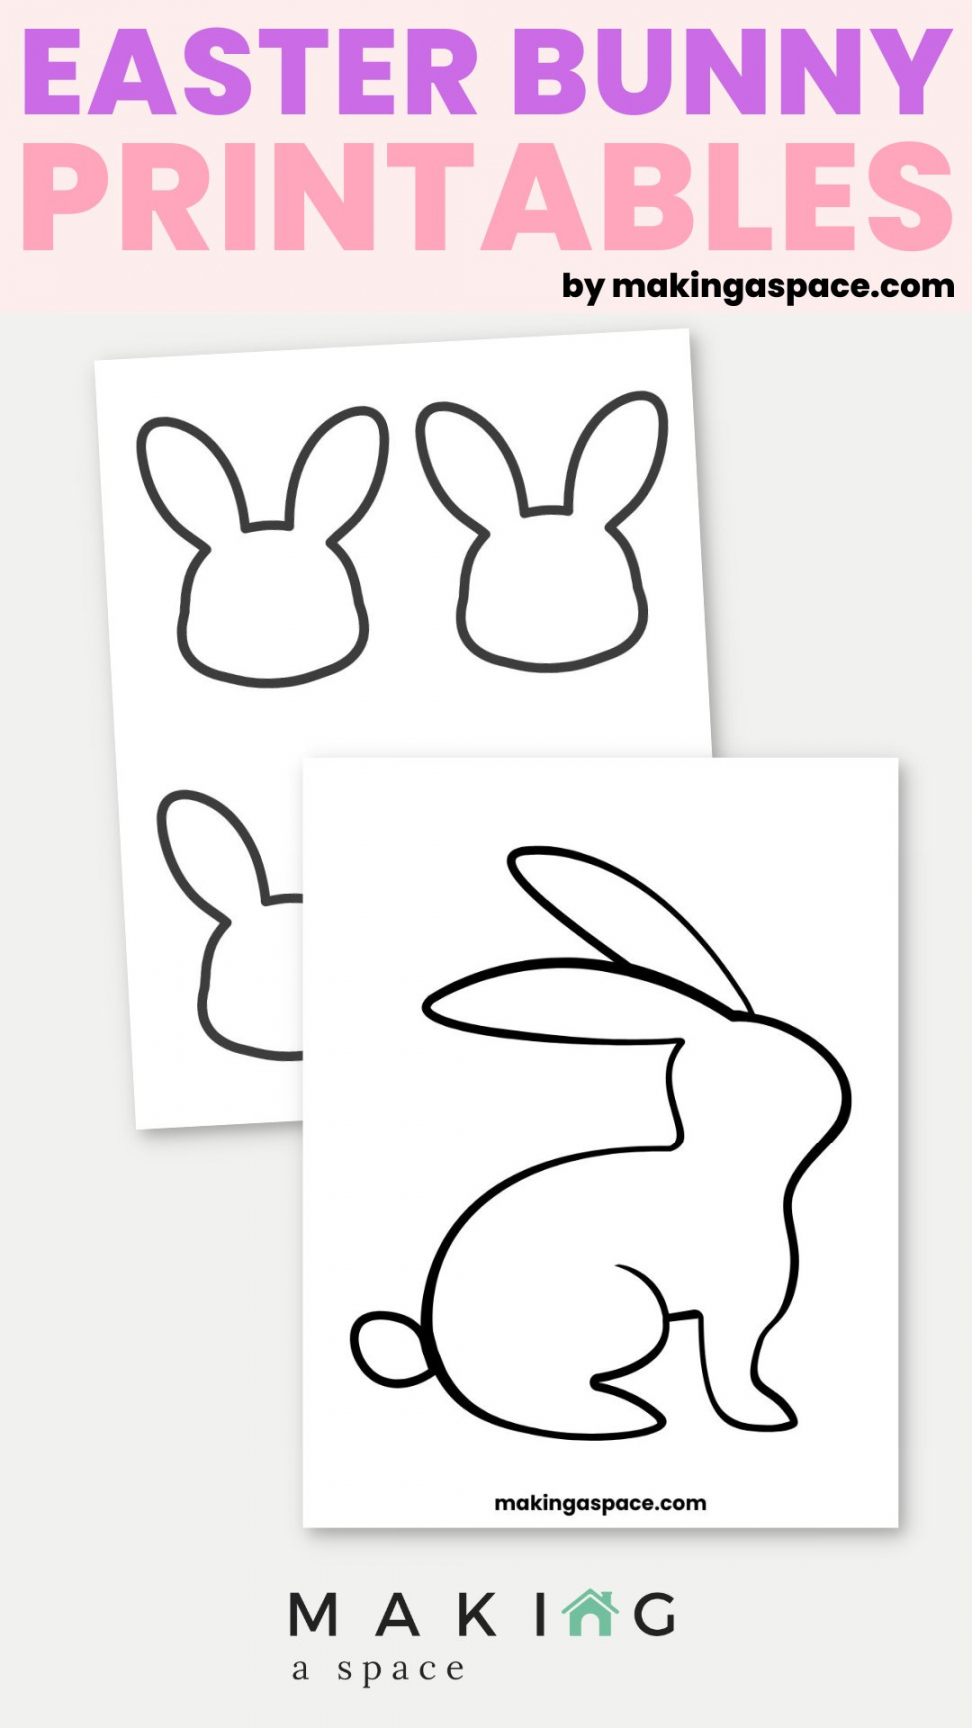 Free Printable Easter Bunny Templates - Making A Space - FREE Printables - Easter Bunny Templates Printable Free